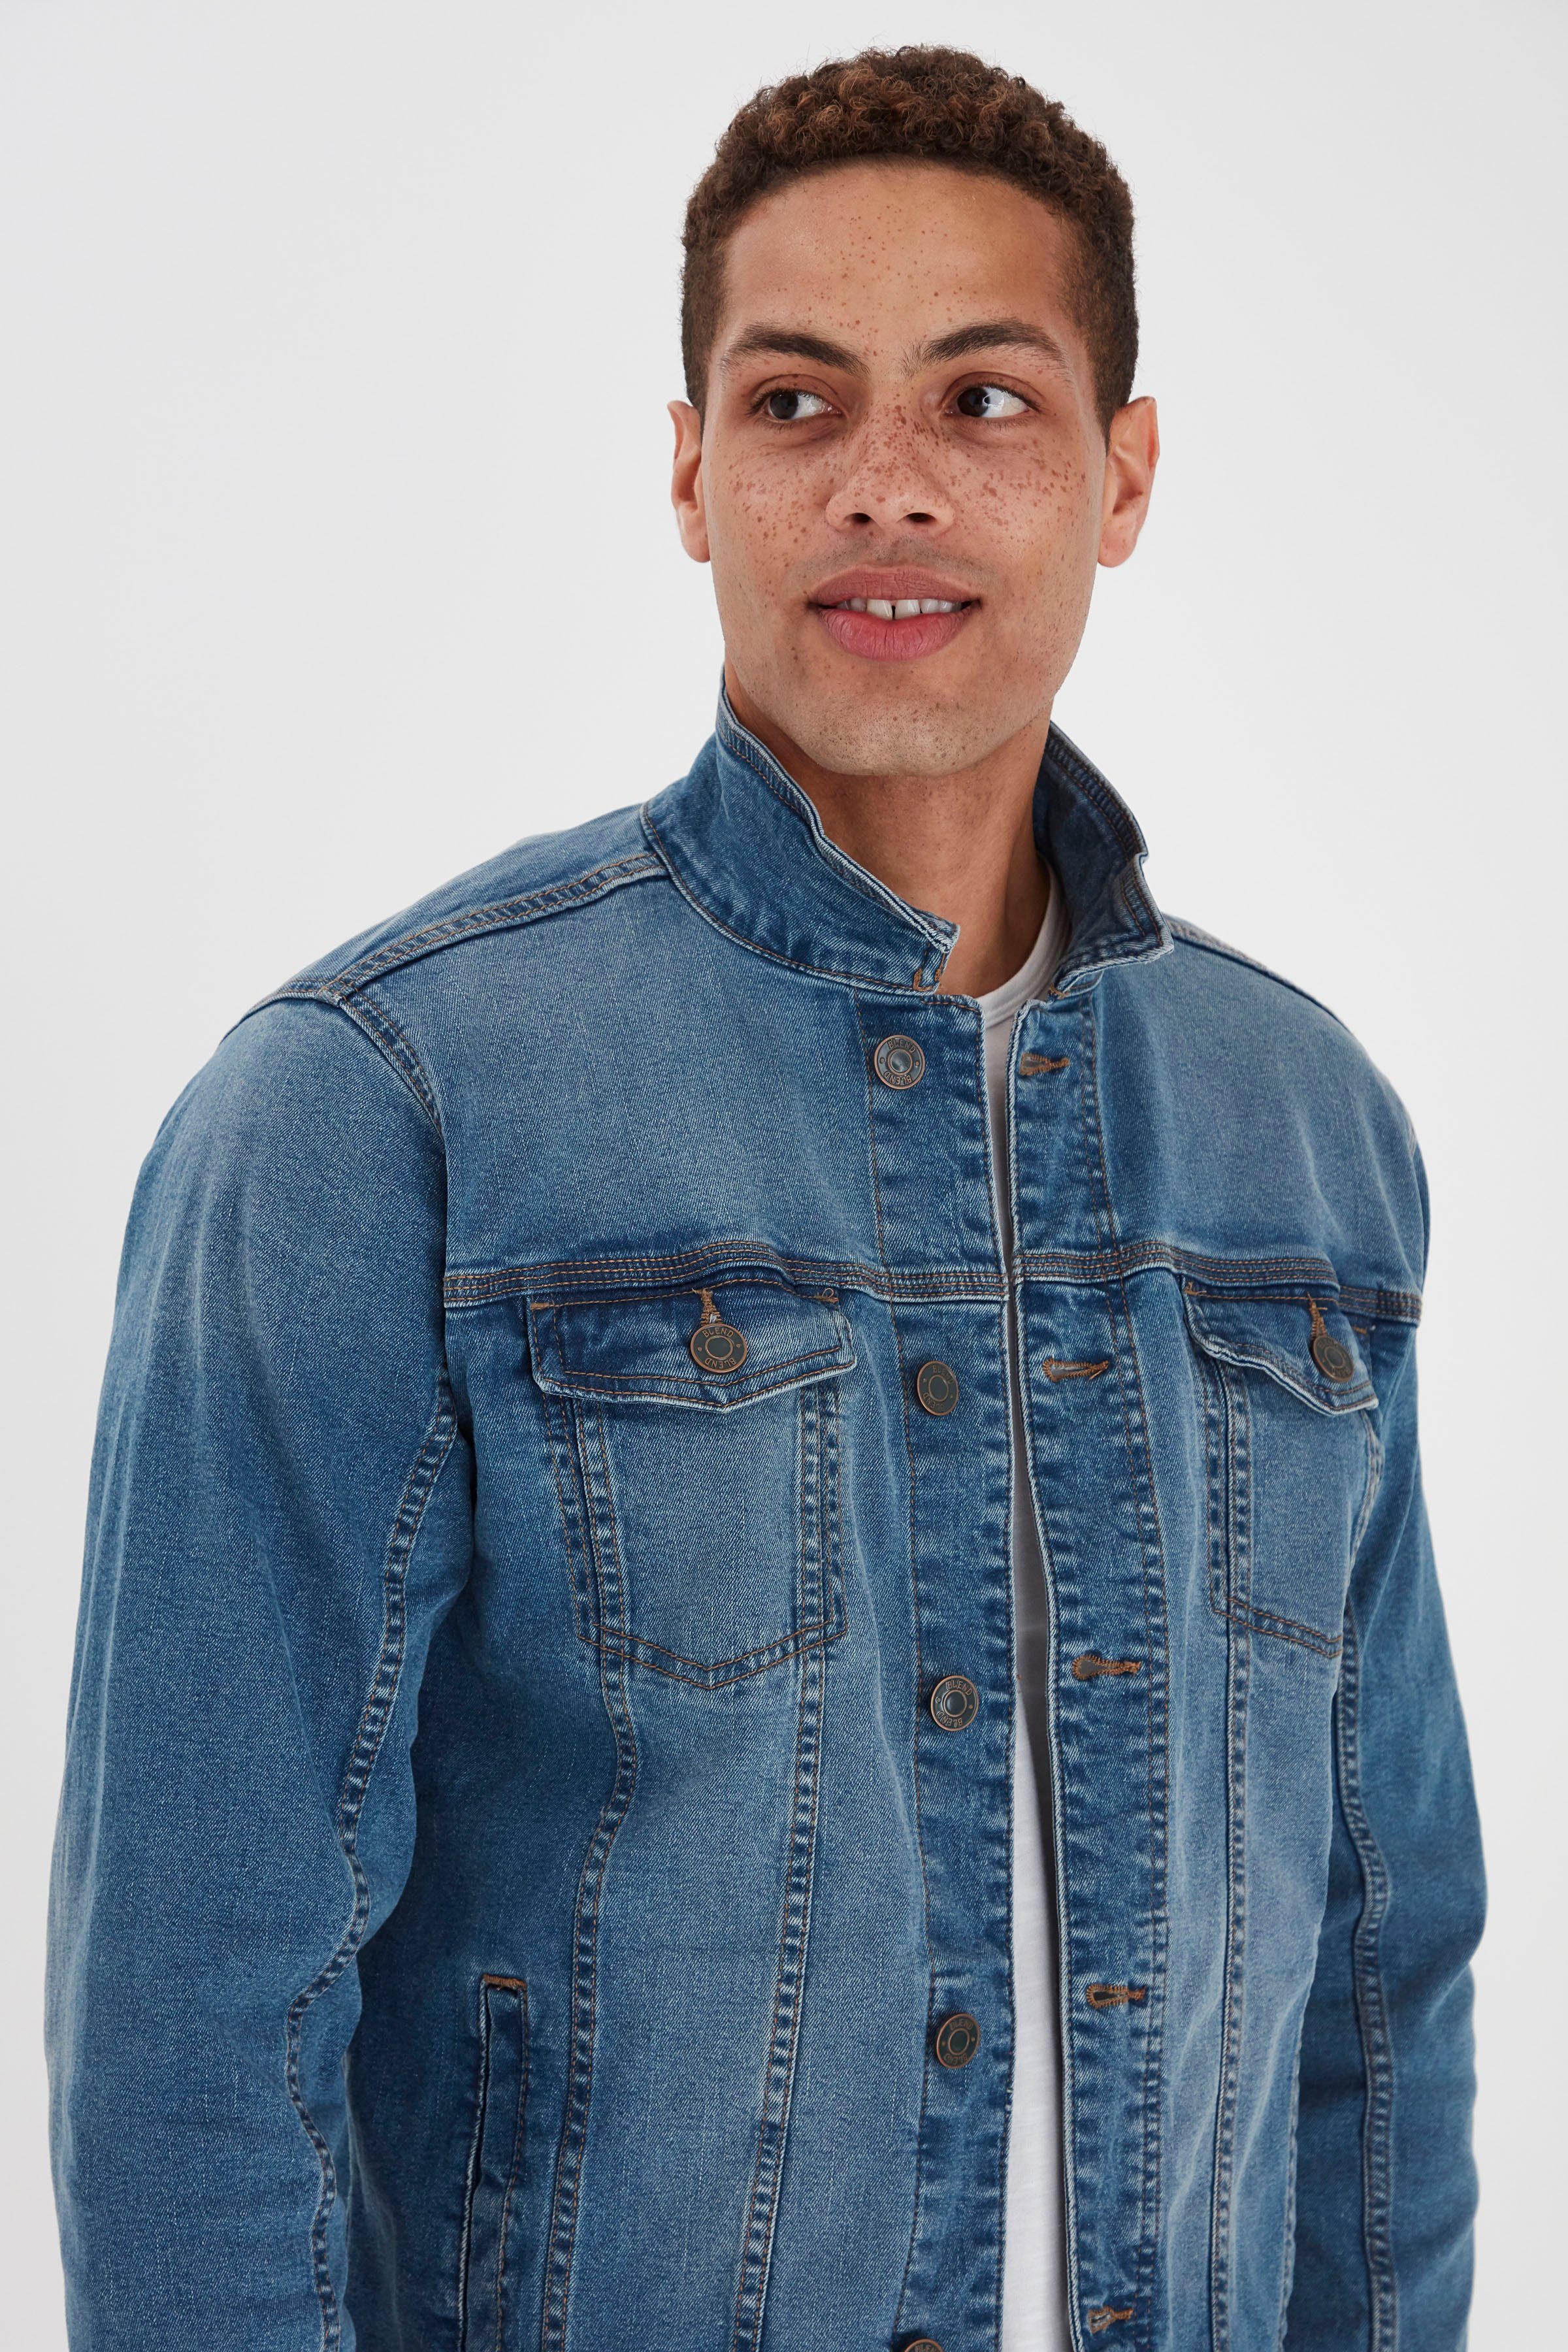 BHNARIL mid-blue Jeansjacke washed Blend